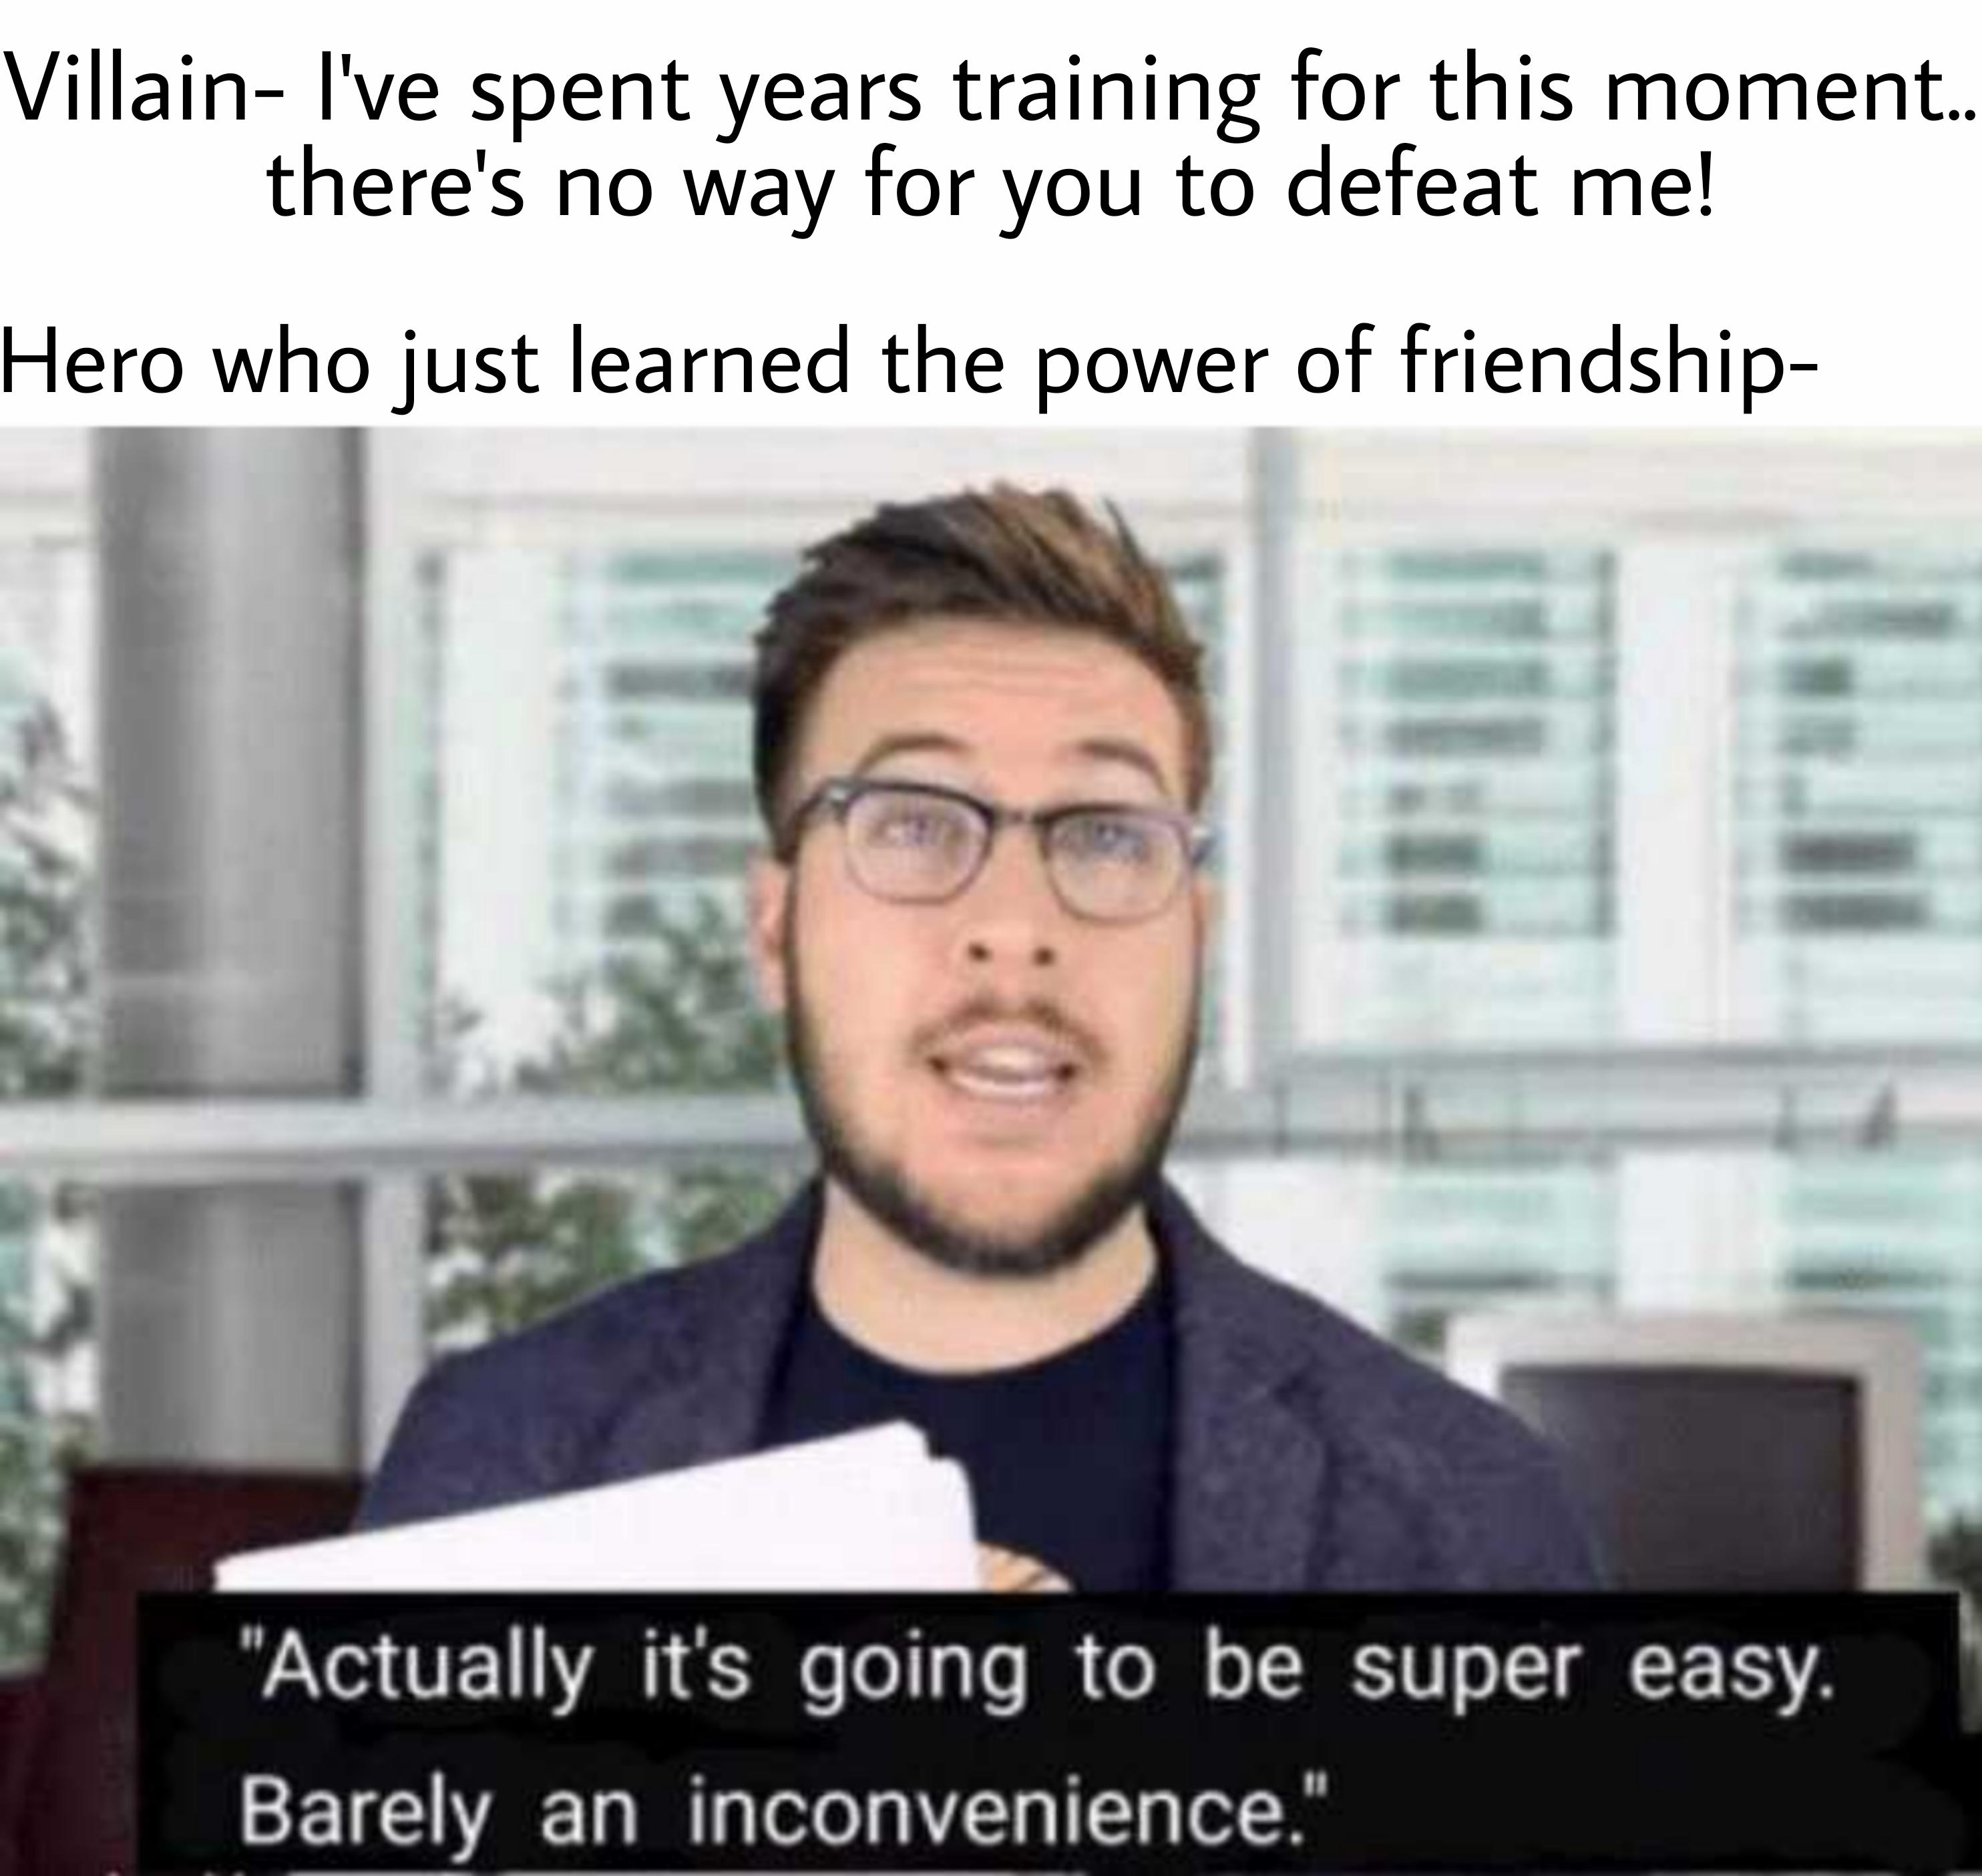 super easy barely an inconvenience meme - Villain I've spent years training for this moment.. there's no way for you to defeat me! Hero who just learned the power of friendship "Actually it's going to be super easy. Barely an inconvenience."